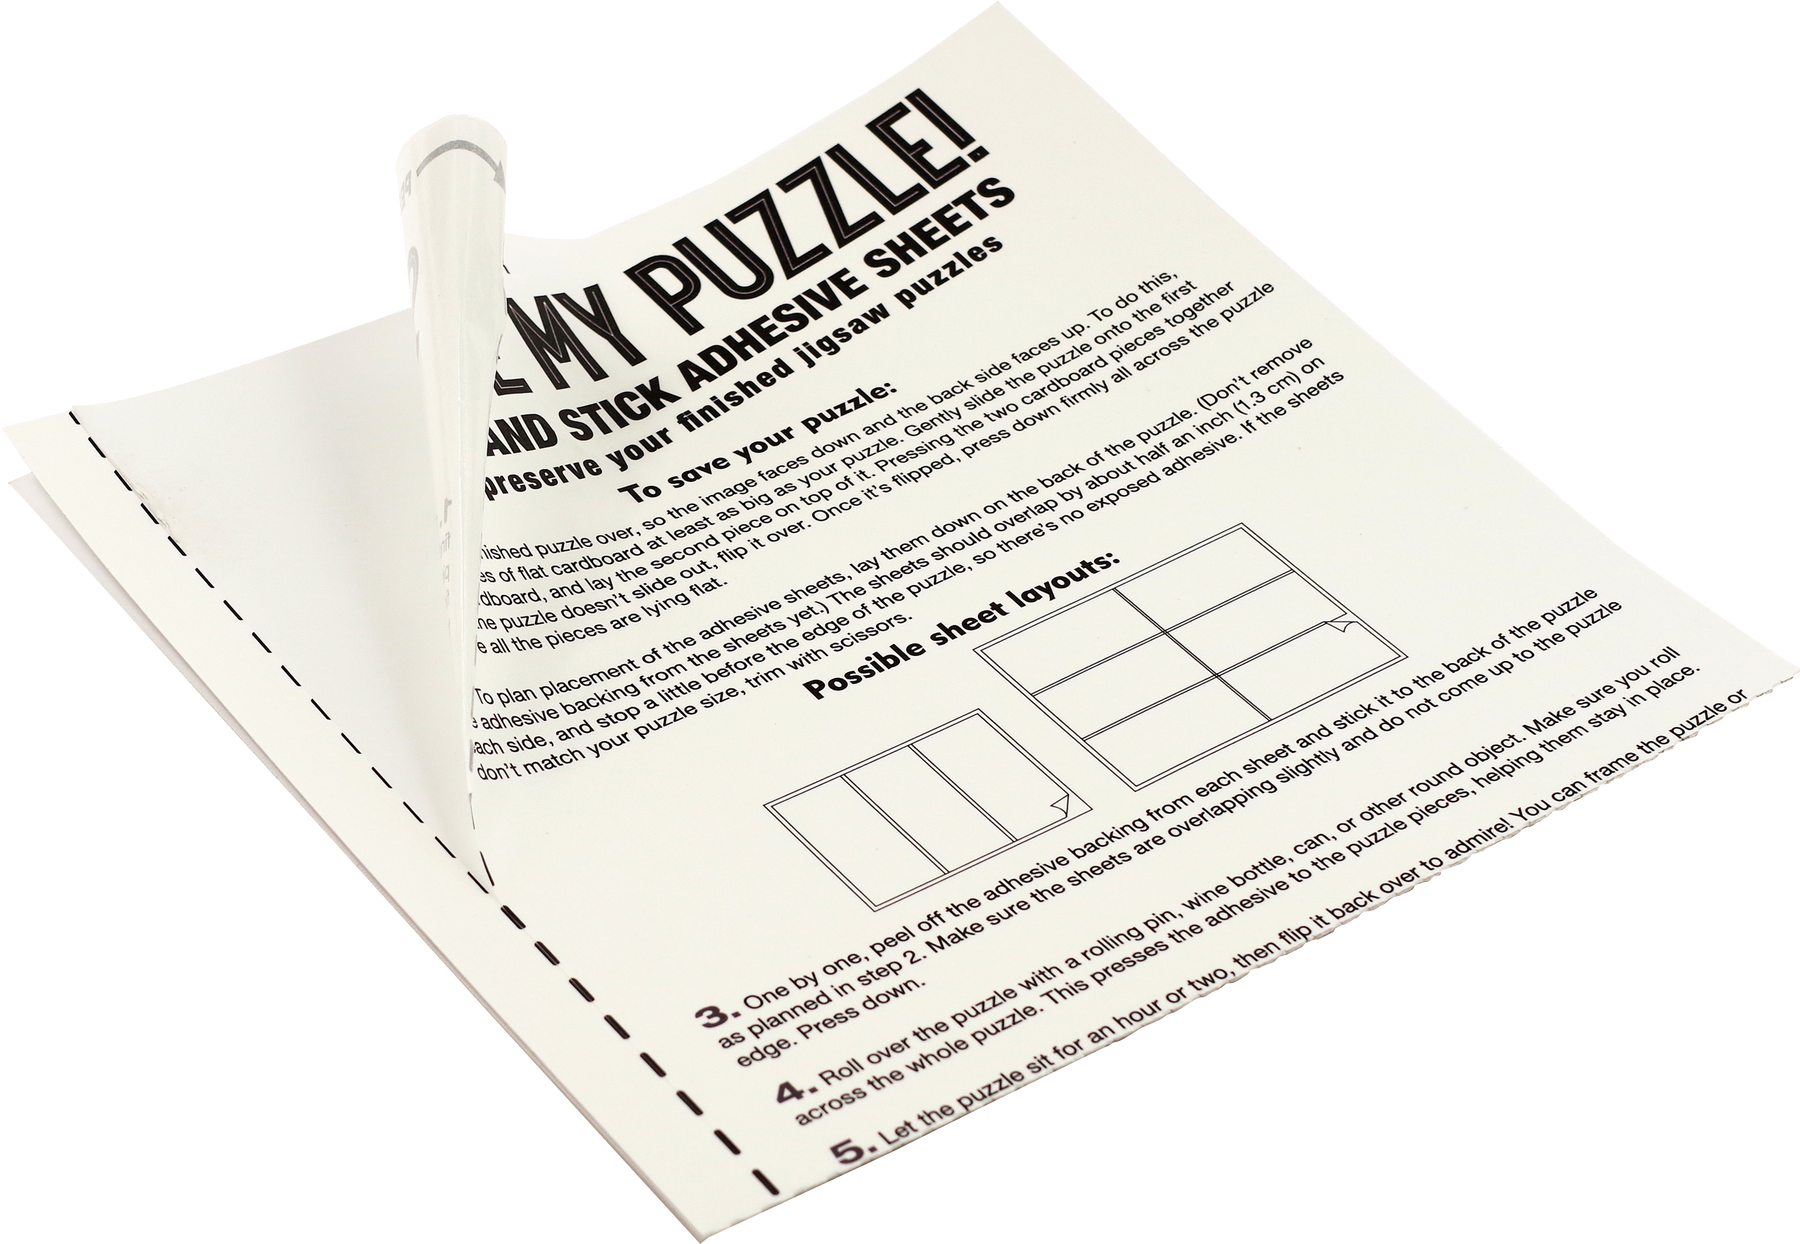 Save My Puzzle! Peel and Stick Adhesive Sheets – Peter Pauper Press